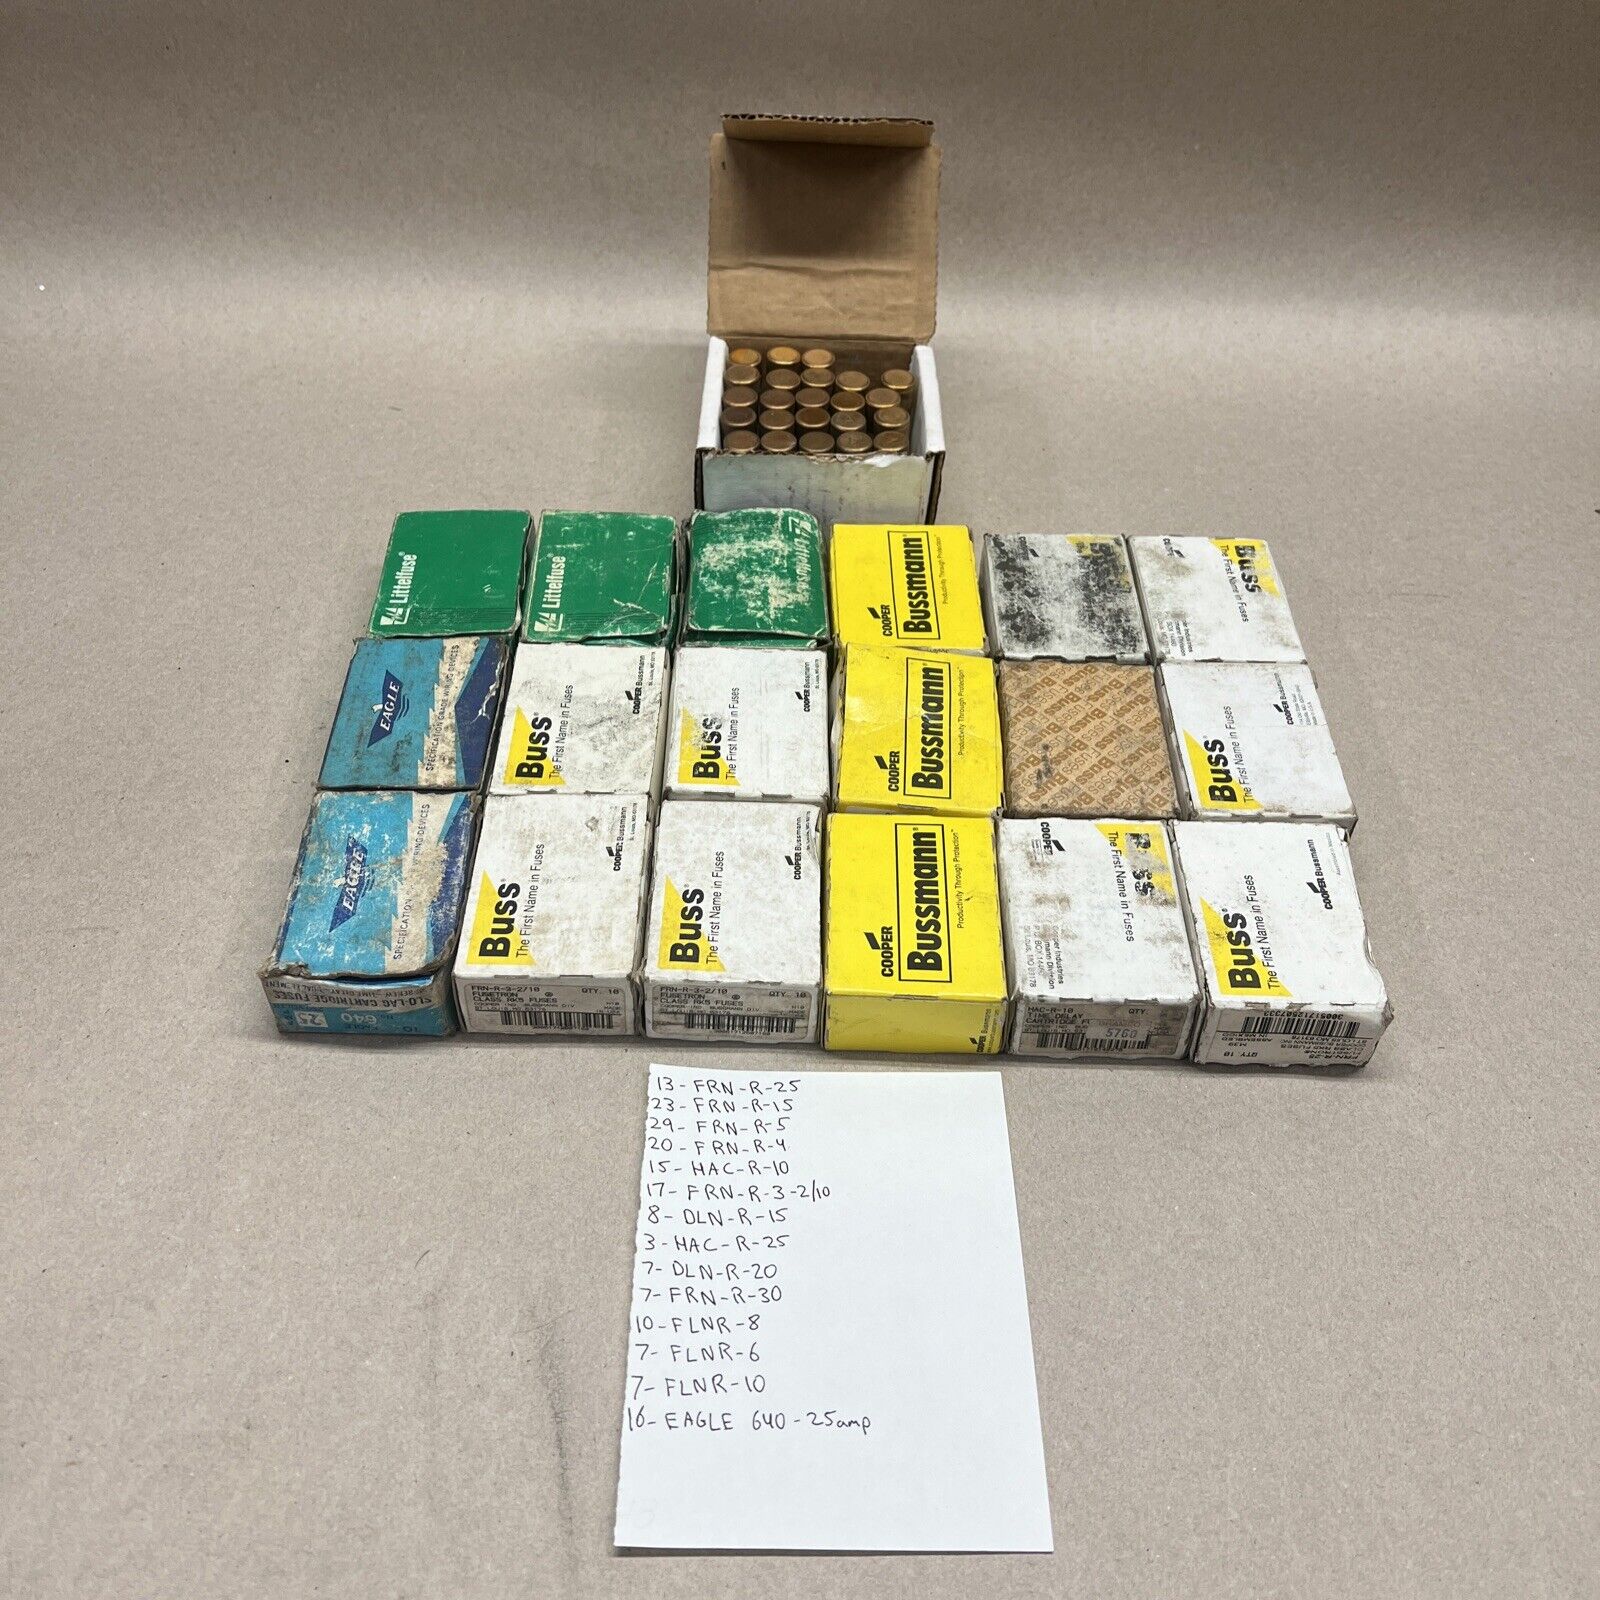 Cooper Bussmann, Littelfuse, Buss, Eagle - Large Mixed Lot of Fuses